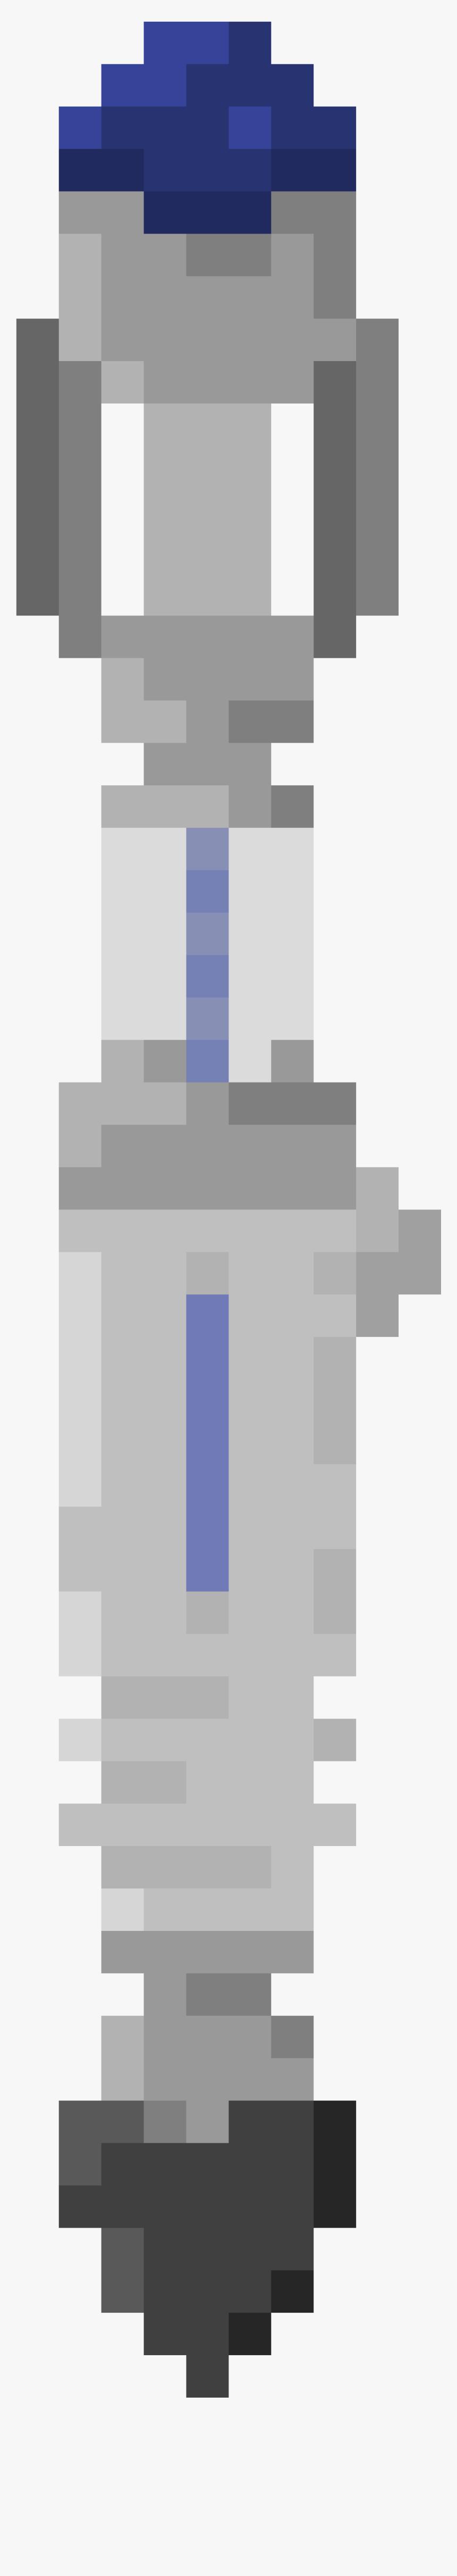 Doctor Who Sonic Screwdriver Pixel Art, HD Png Download, Free Download